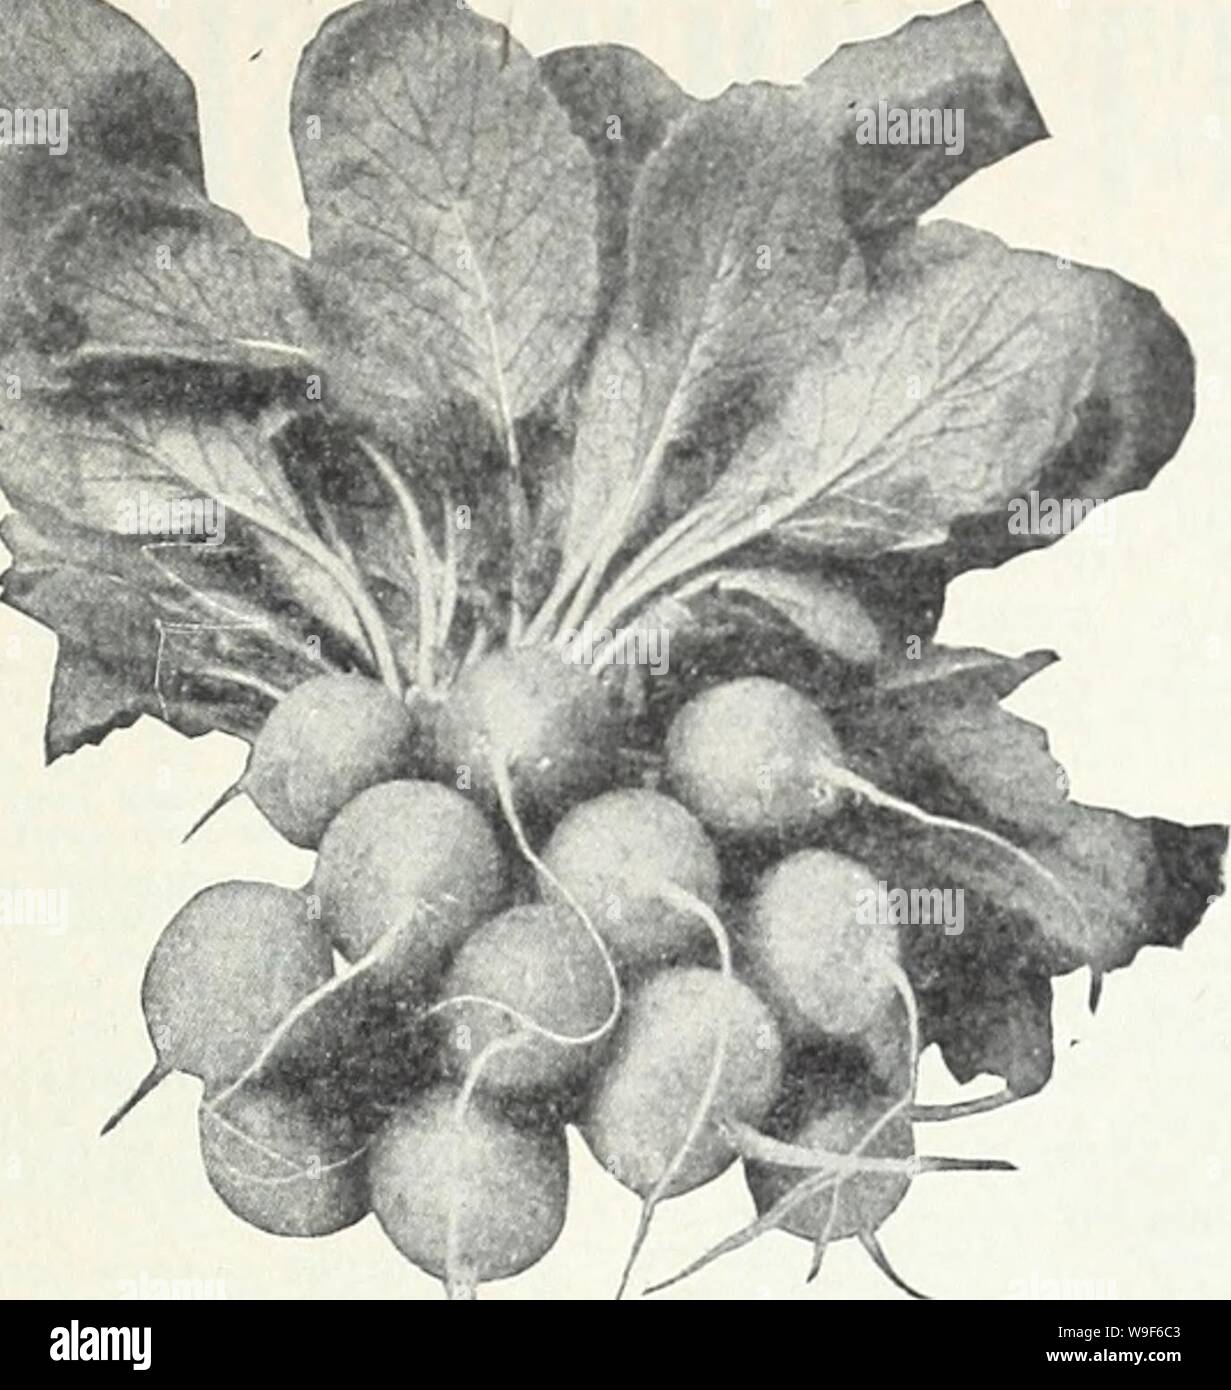 Archive image from page 18 of Currie's 65th year garden annual. Currie's 65th year garden annual  curries65thyearg19curr Year: 1940 ( Radish—Earliest Scarlet Globe Forcing i Cardinal Globe! EARLIEST SCARLET GLOBE (Cardinal Globe) EXTRA SELECTED SHORT- LEAVED STOCK—The standard for either early forcing or open ground work. Our stock of it is unsurpassed. The skin is bright carmine; flesh white, firm and crisp. Oi., 15c; 1/4 lb., 25c; lb., 70c; 10 lbs., $6.50; Pkt., 10c. SAXA—Earliest to mature. Grow- ers have had thern ready for use 2 weeks after planting. Round, thin, bright red skin and crisp Stock Photo